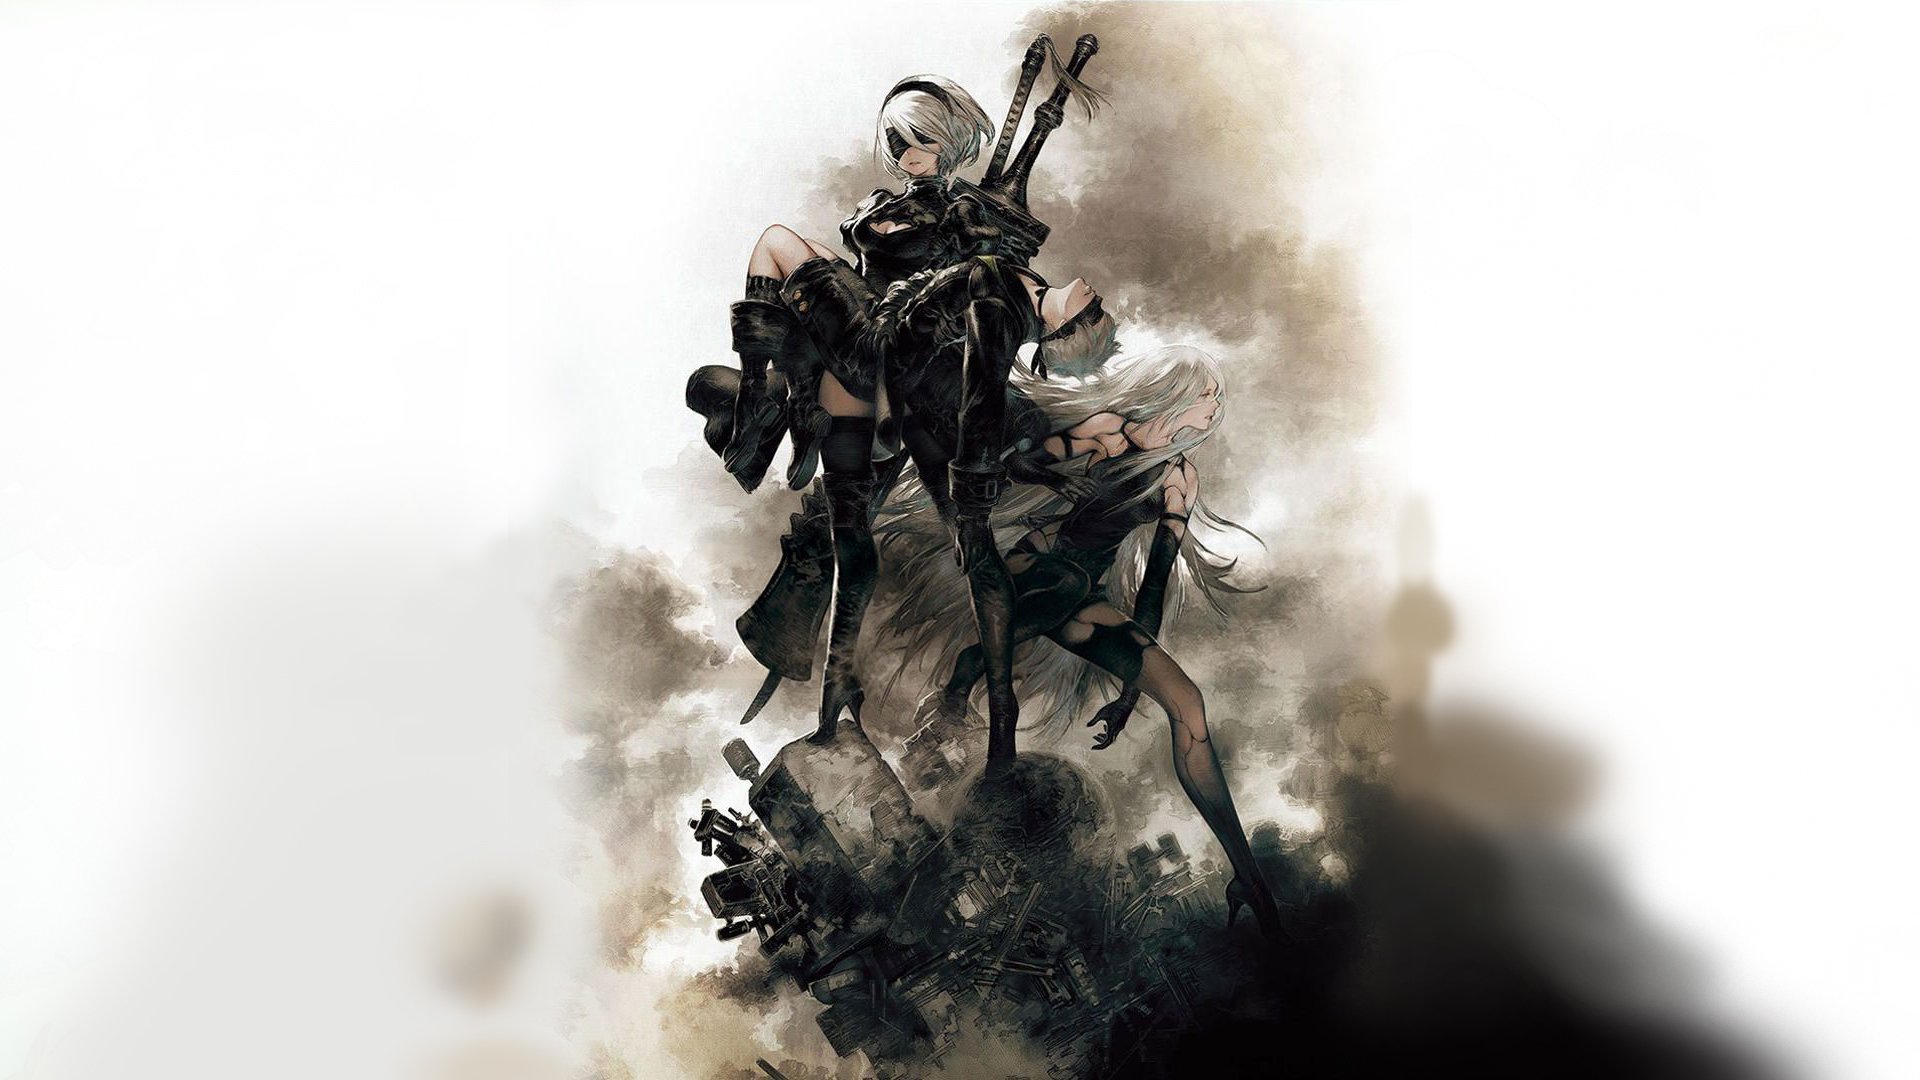 NieR Automata: The End of YoRHa Edition is one of the most impressive  Nintendo Switch ports I've played